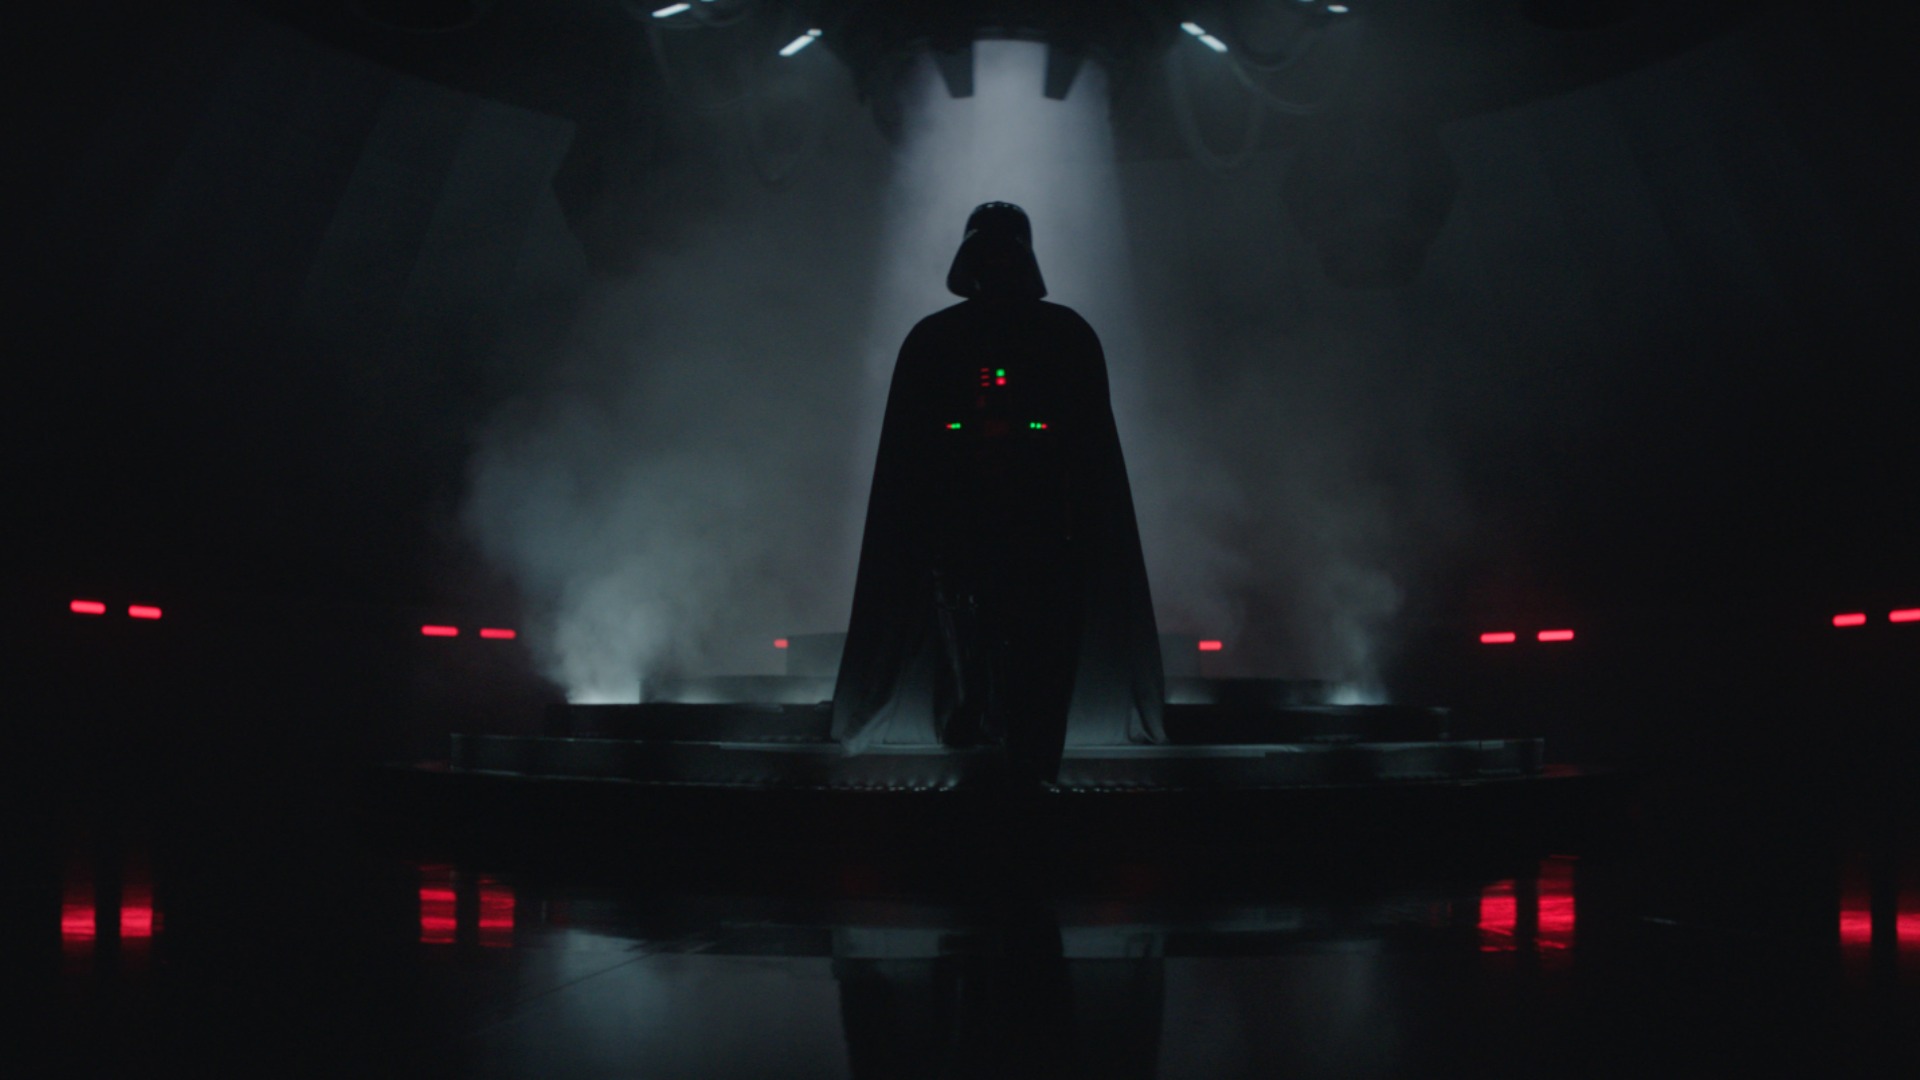 Hayden Christensen teases more Darth Vader: “The extent of this journey remains to be seen”